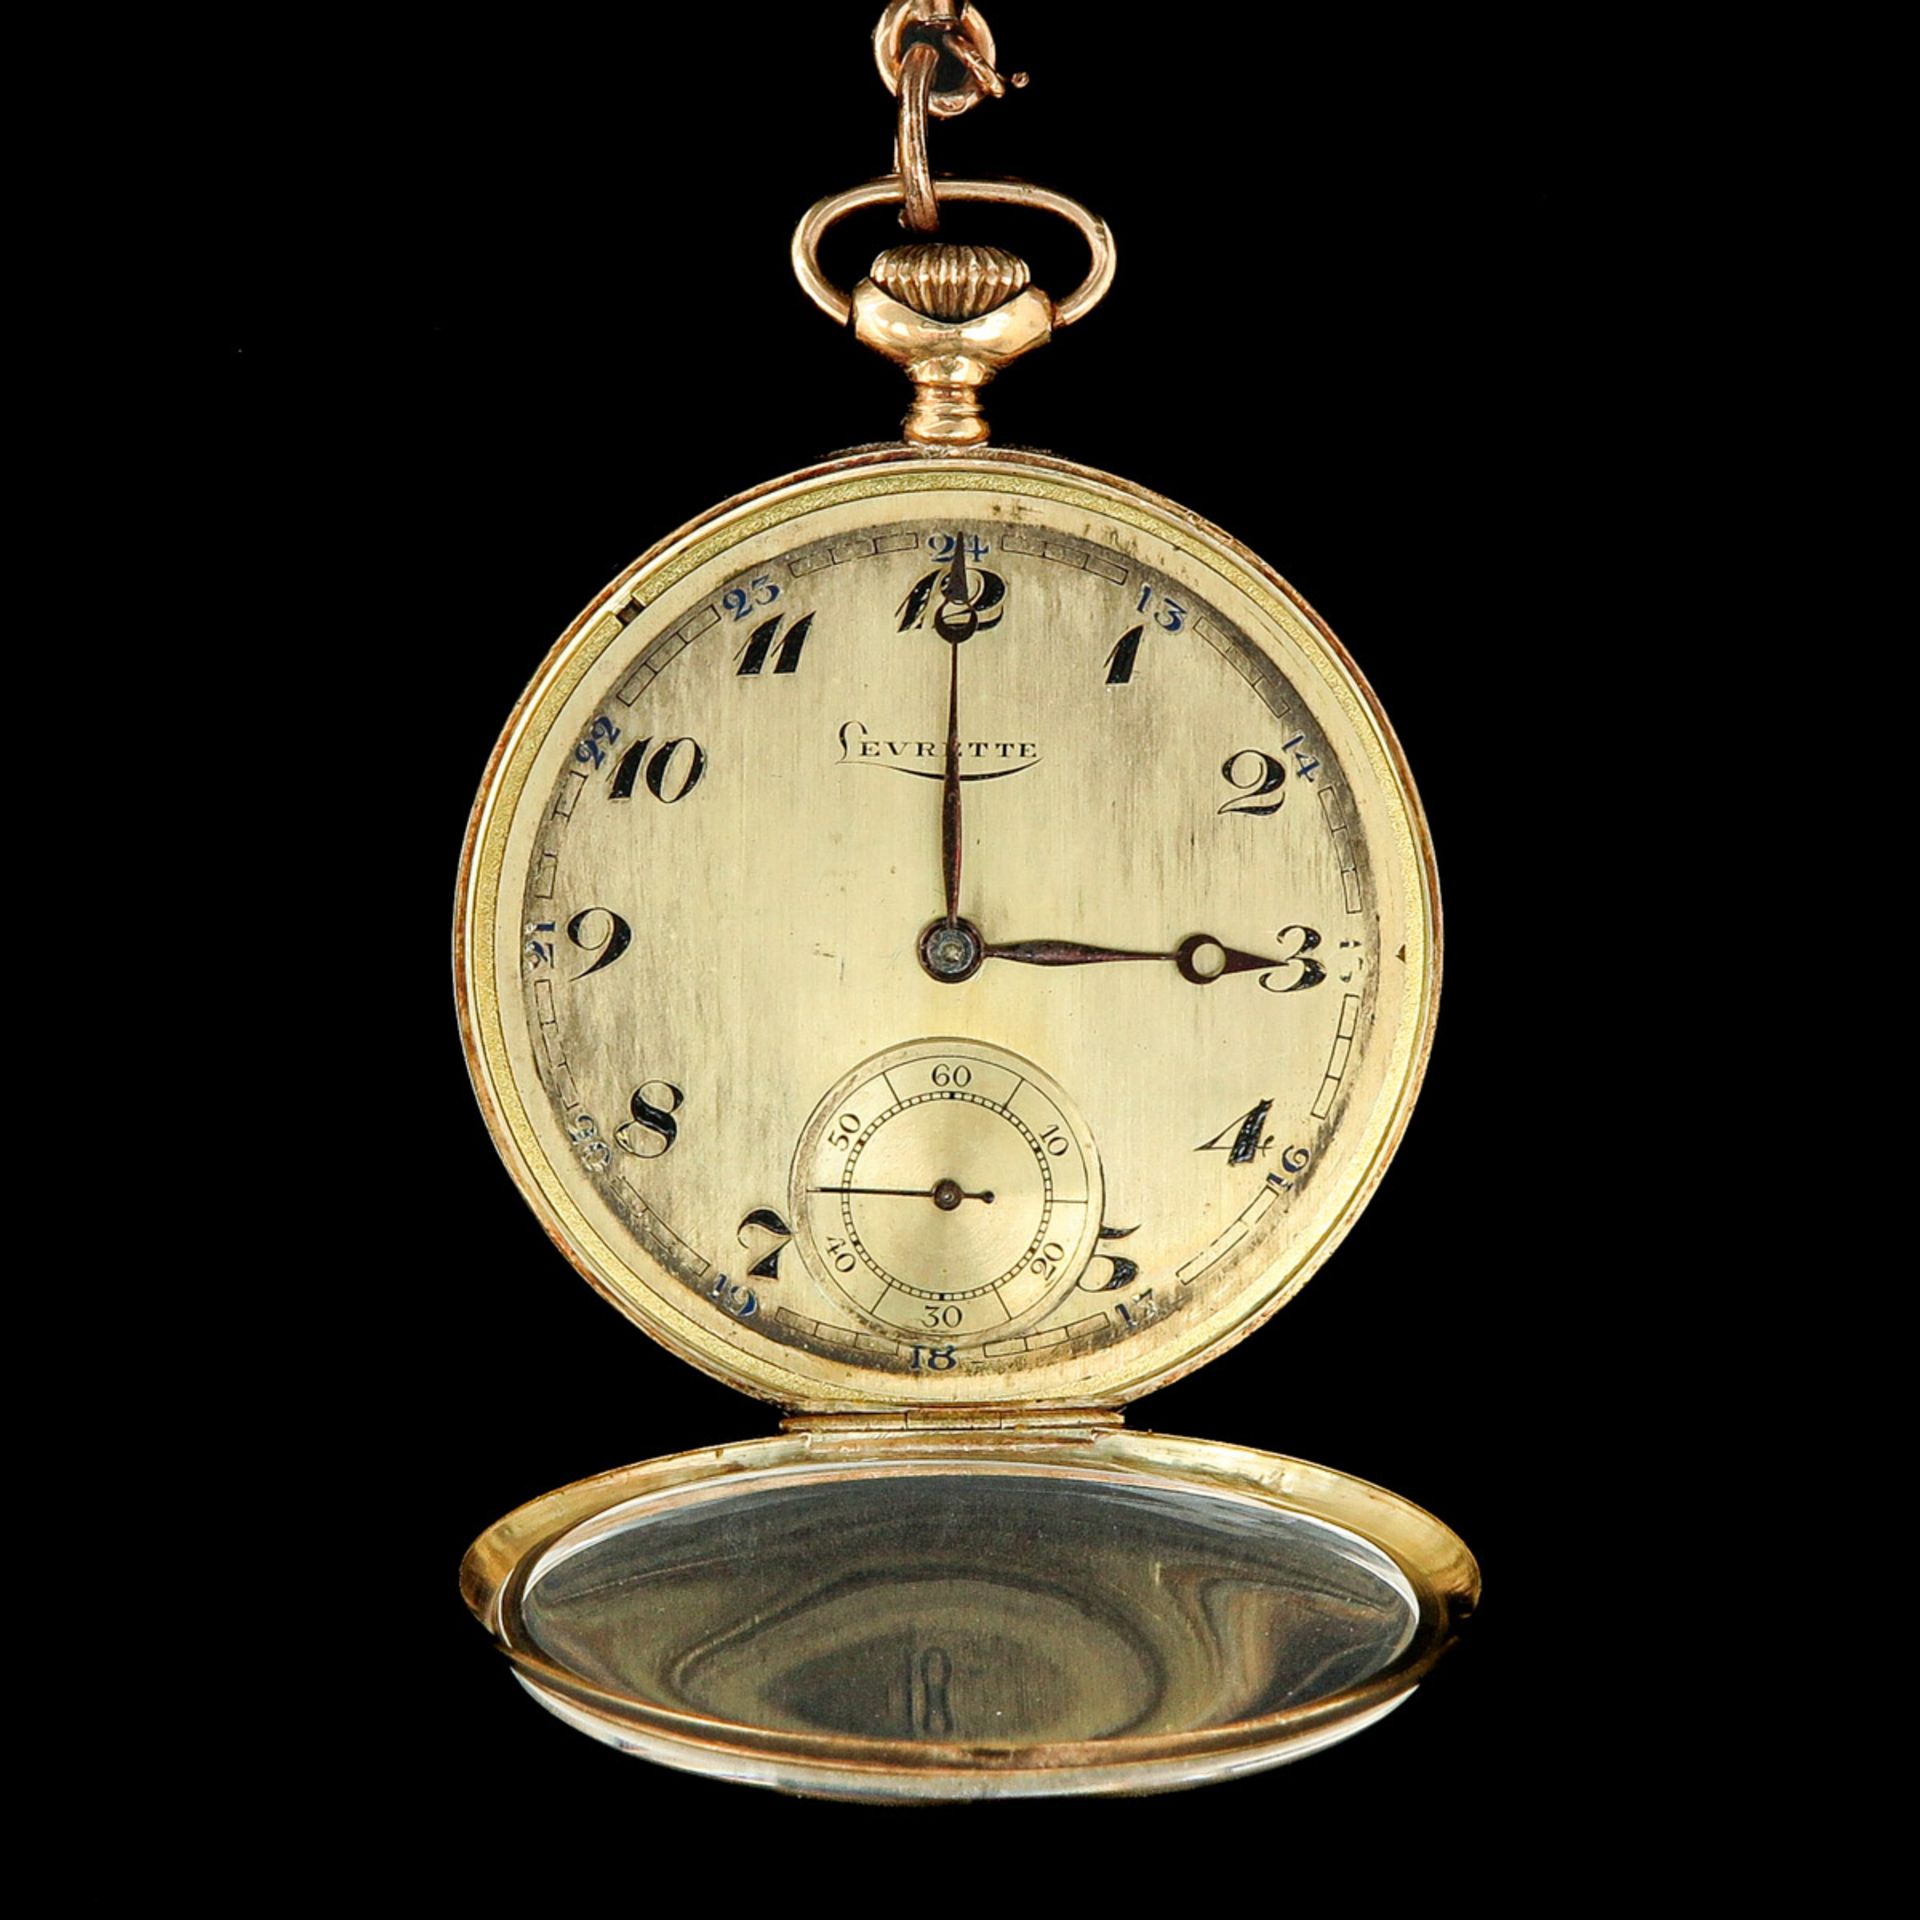 A Pocket Watch Holder with Pocket Watch - Image 4 of 7